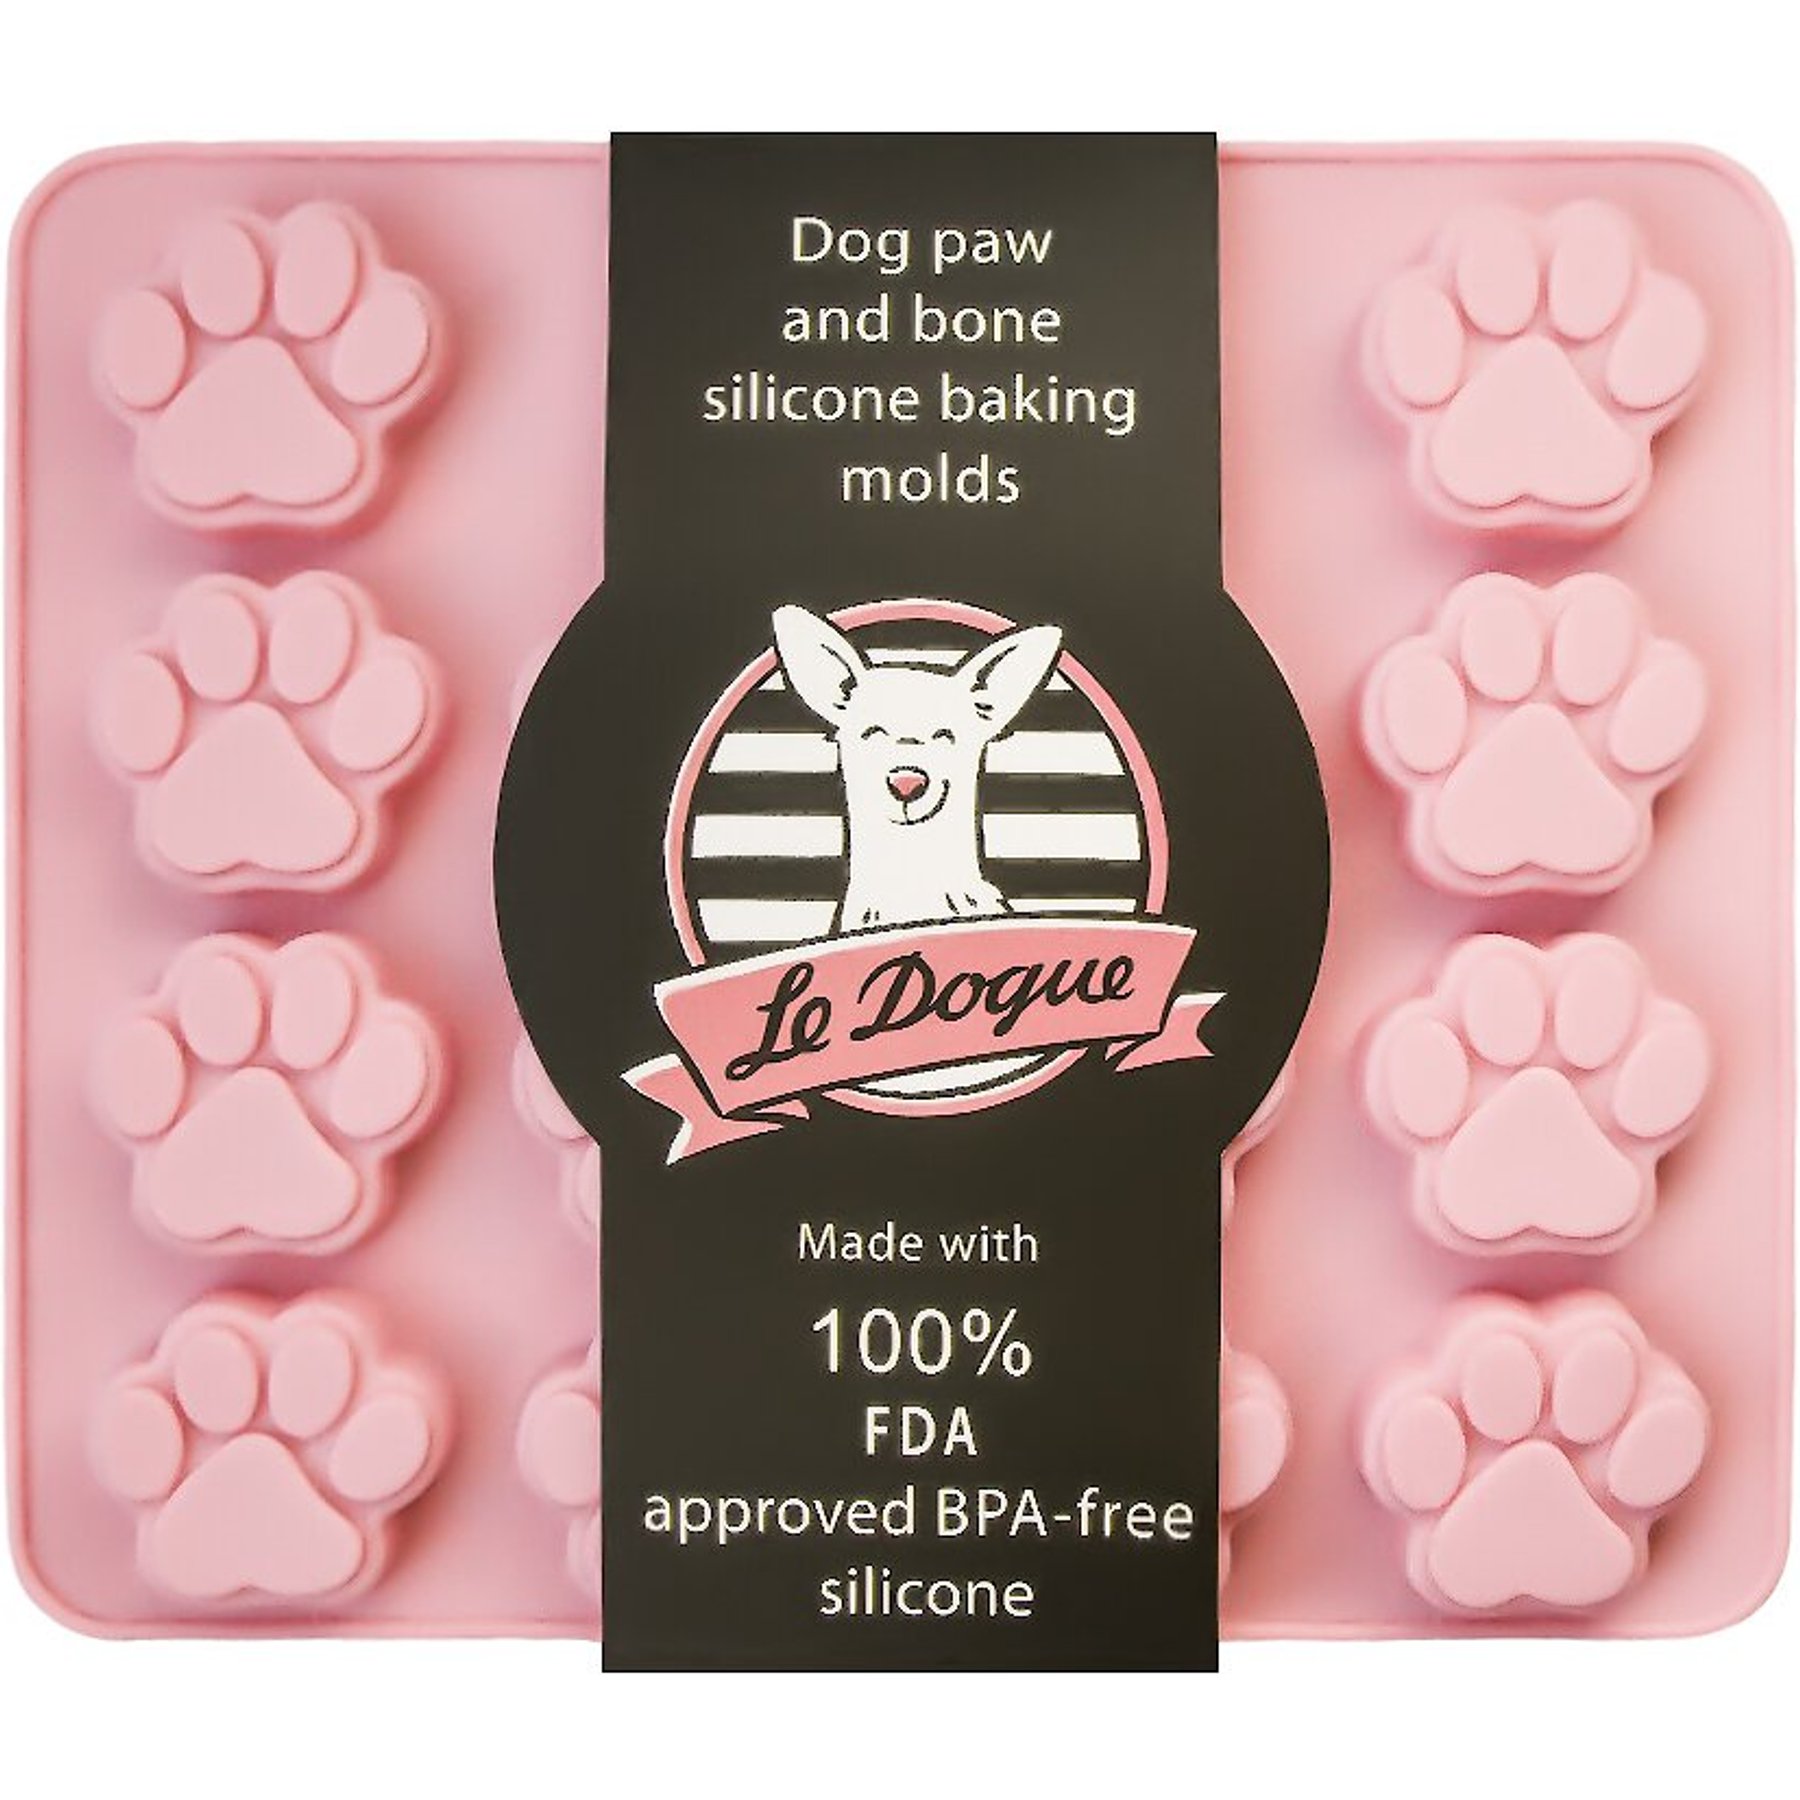 Review of the Le Dogue Silicone Molds - A Walk with Bernie